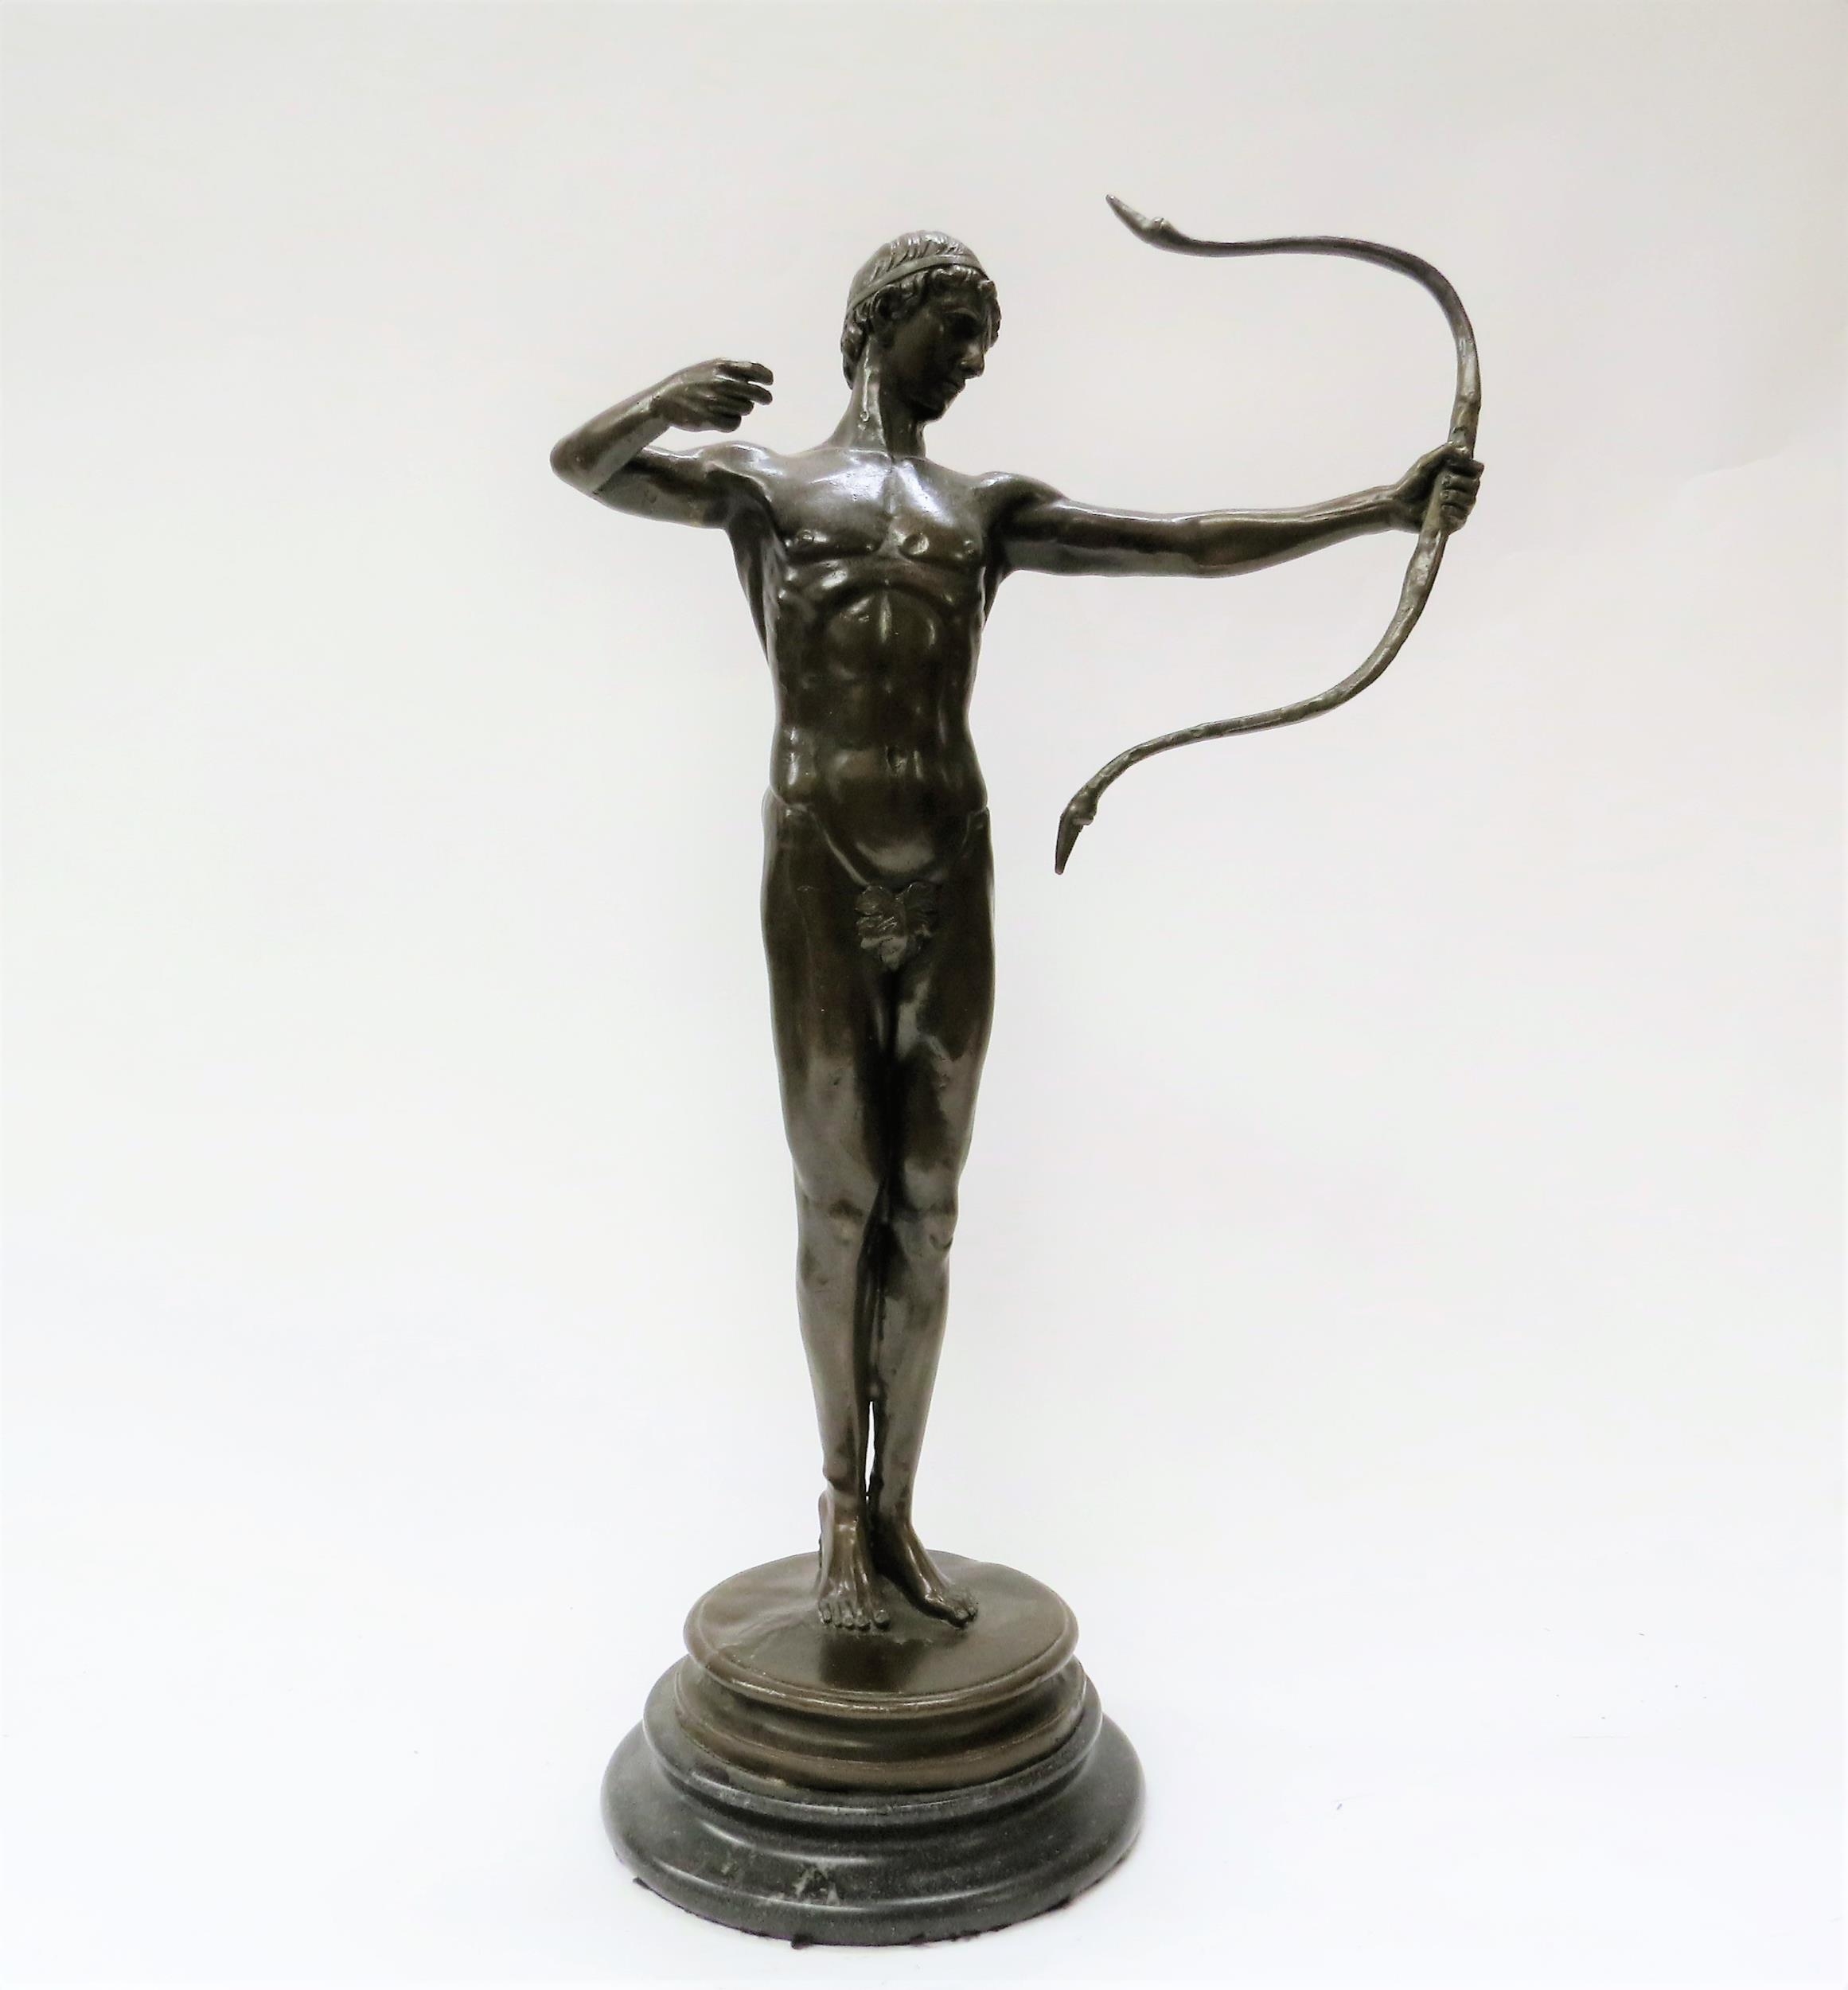 A bronze sculpture in the manner of Sir William Hamo Thornycroft's work depicting the champion Greek